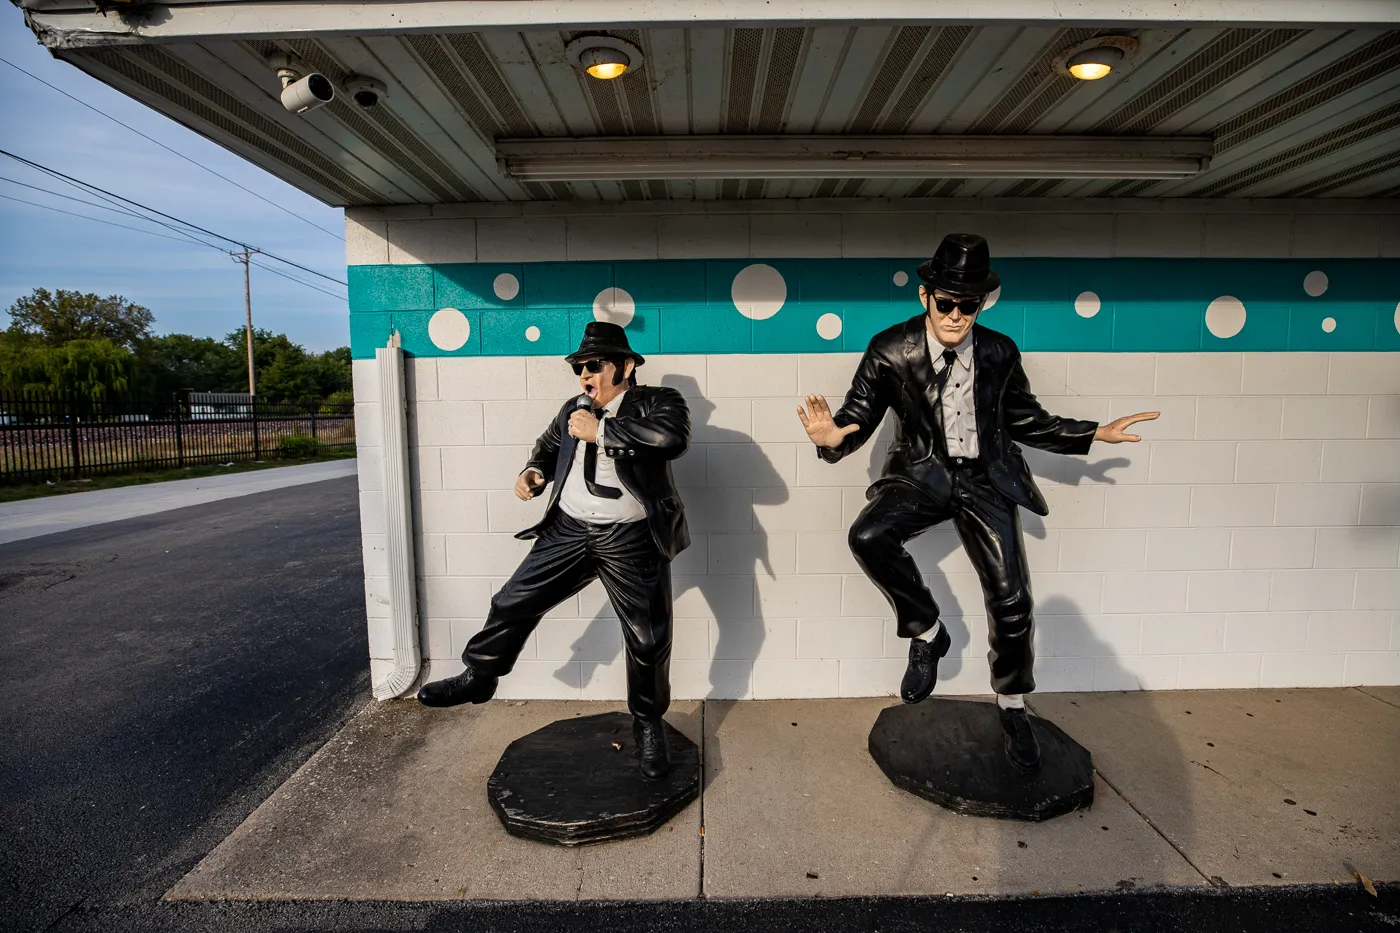 The Blues Brothers statue photo op at the Route 66 Polk-a-Dot Drive In in Braidwood, Illinois